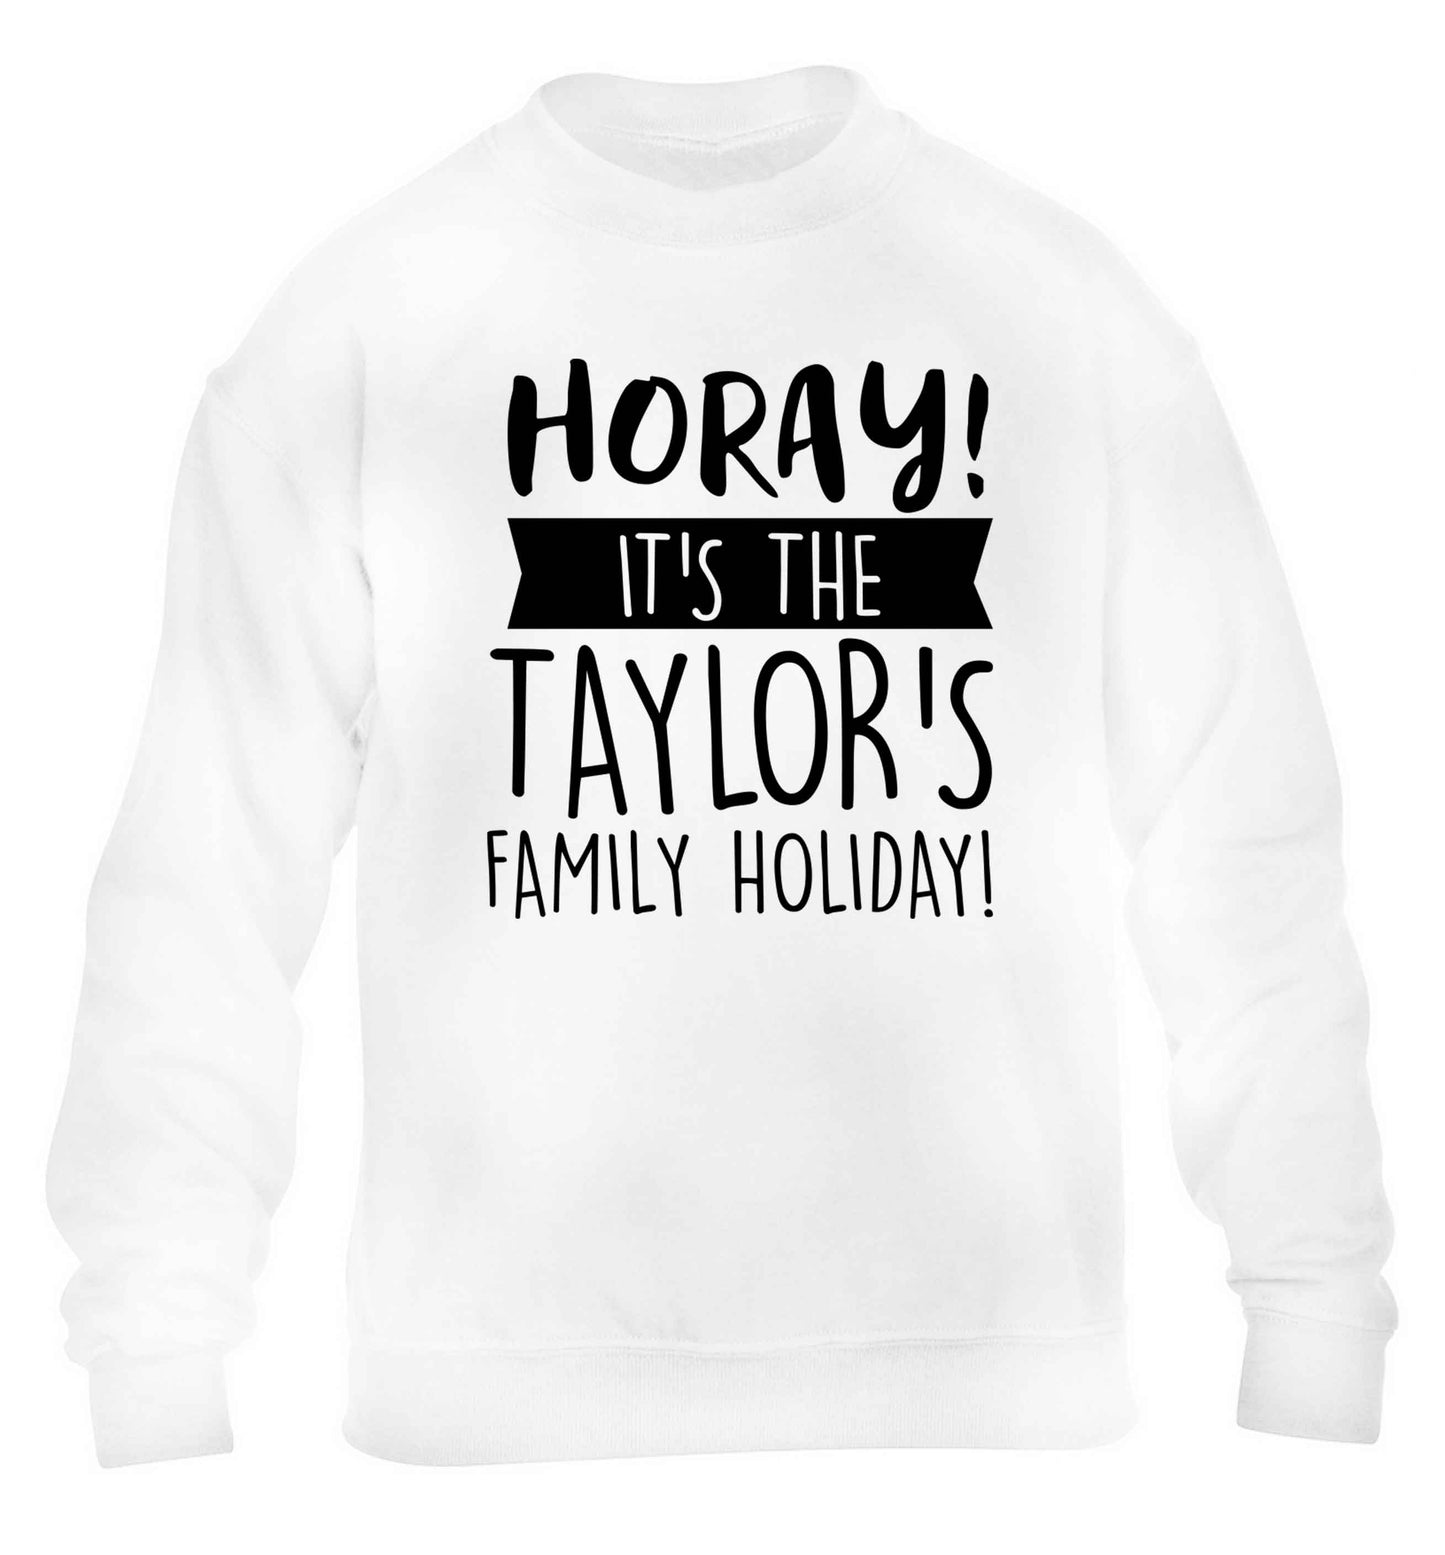 Horay it's the Taylor's family holiday! personalised item children's white sweater 12-13 Years